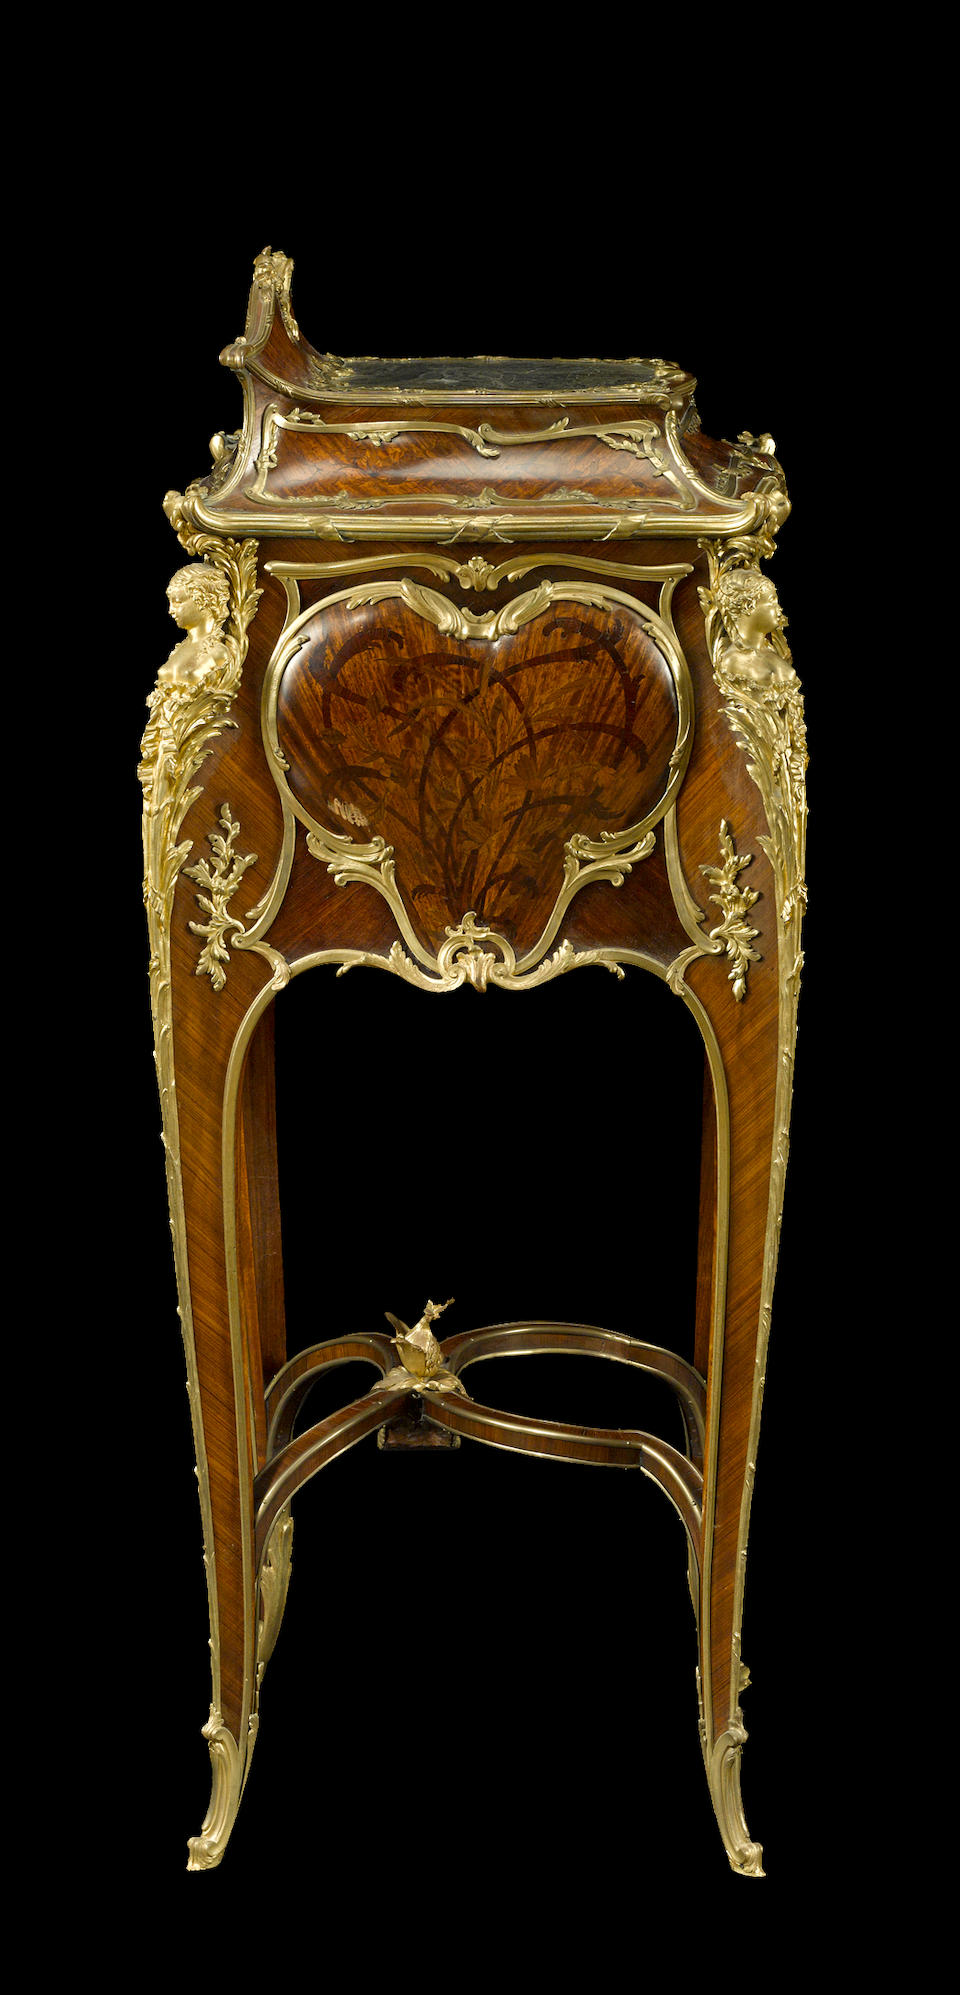 A fine and rare Louis XV style gilt bronze mounted marquetry and rosewood table de nuit Emmanuel Zwienerfourth quarter 19th century